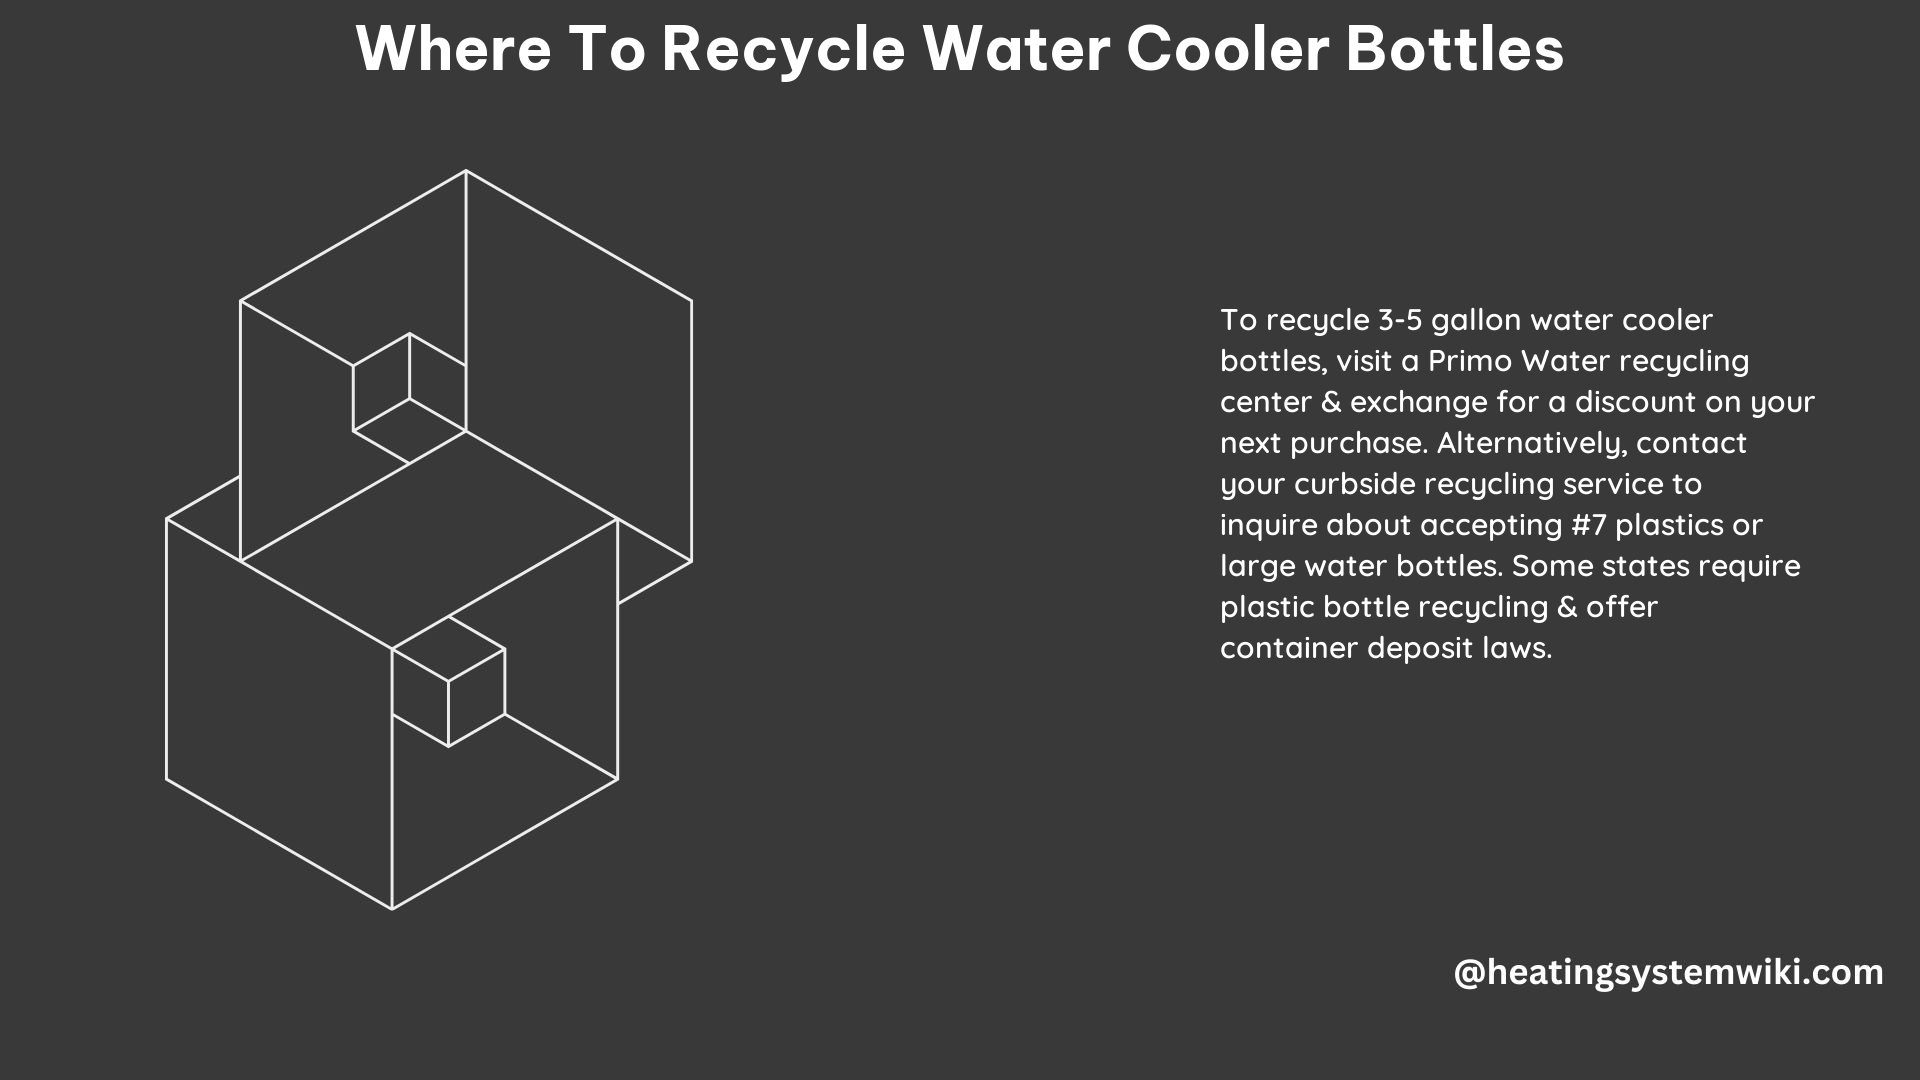 Where to Recycle Water Cooler Bottles